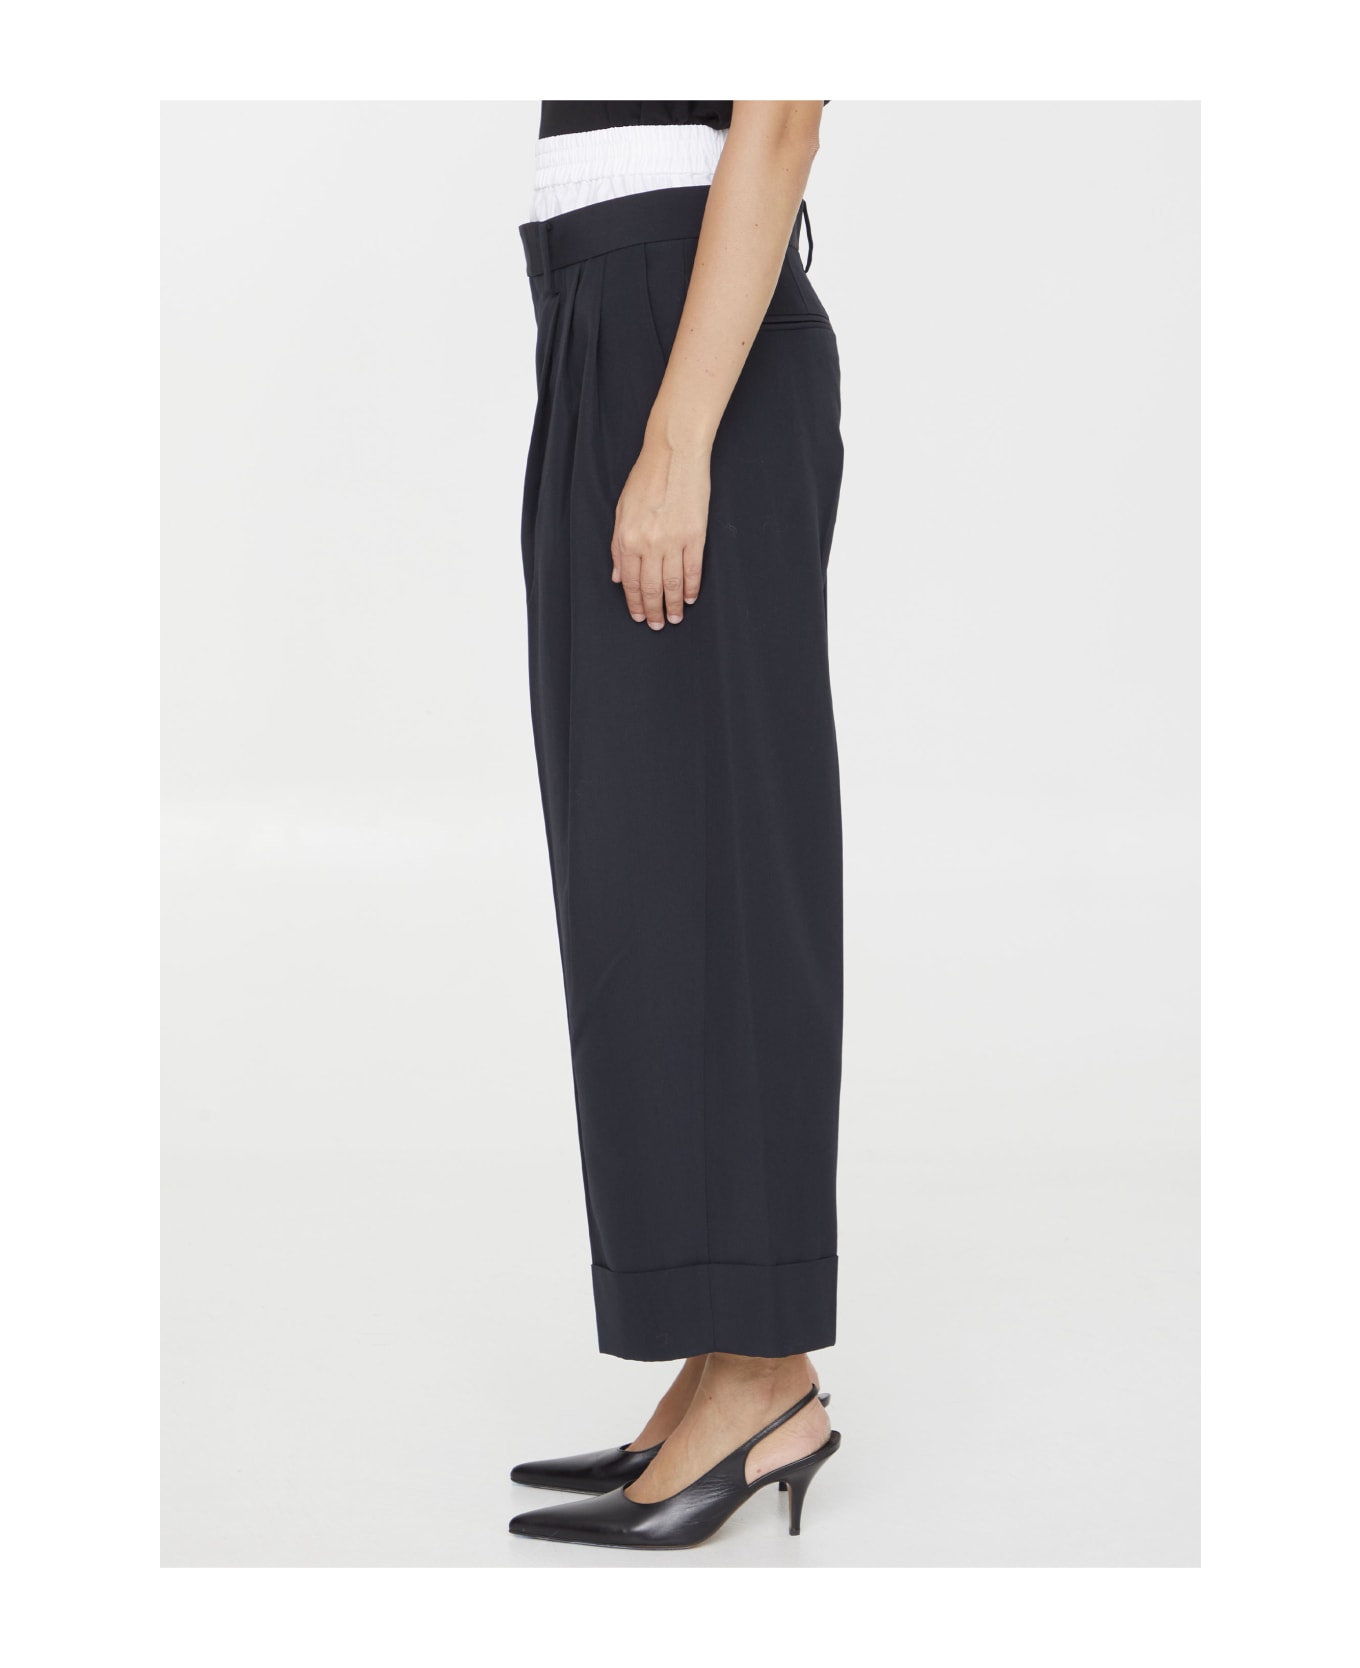 Alexander Wang Layered Tailored Trousers - BLACK